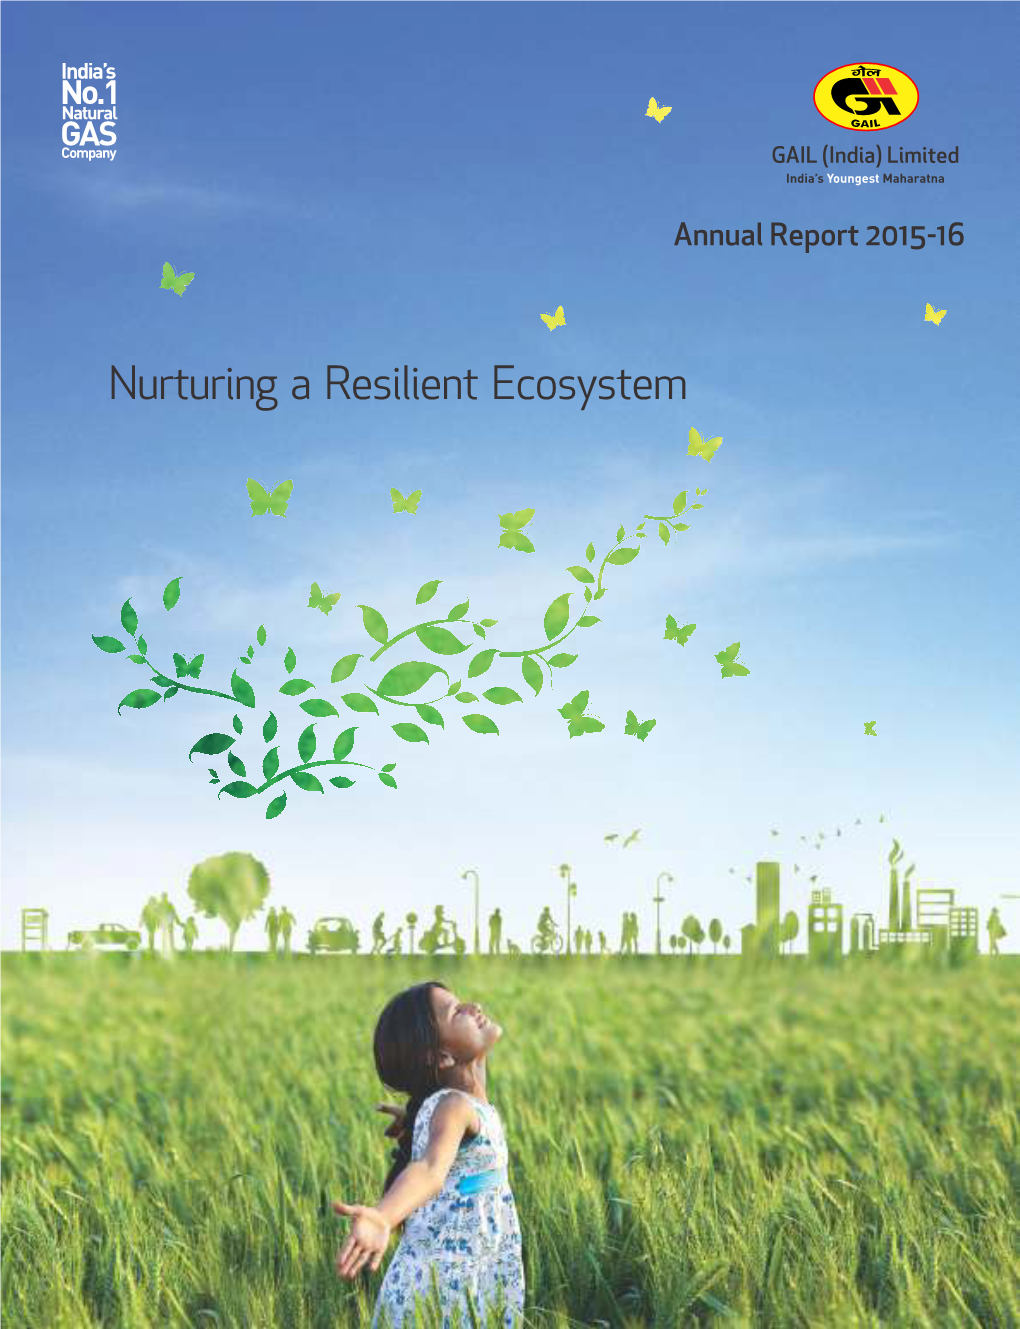 Nurturing a Resilient Ecosystem Nurturing a Resilient Ecosystem Is the Theme of Our Annual Report This India’S No.1 Year